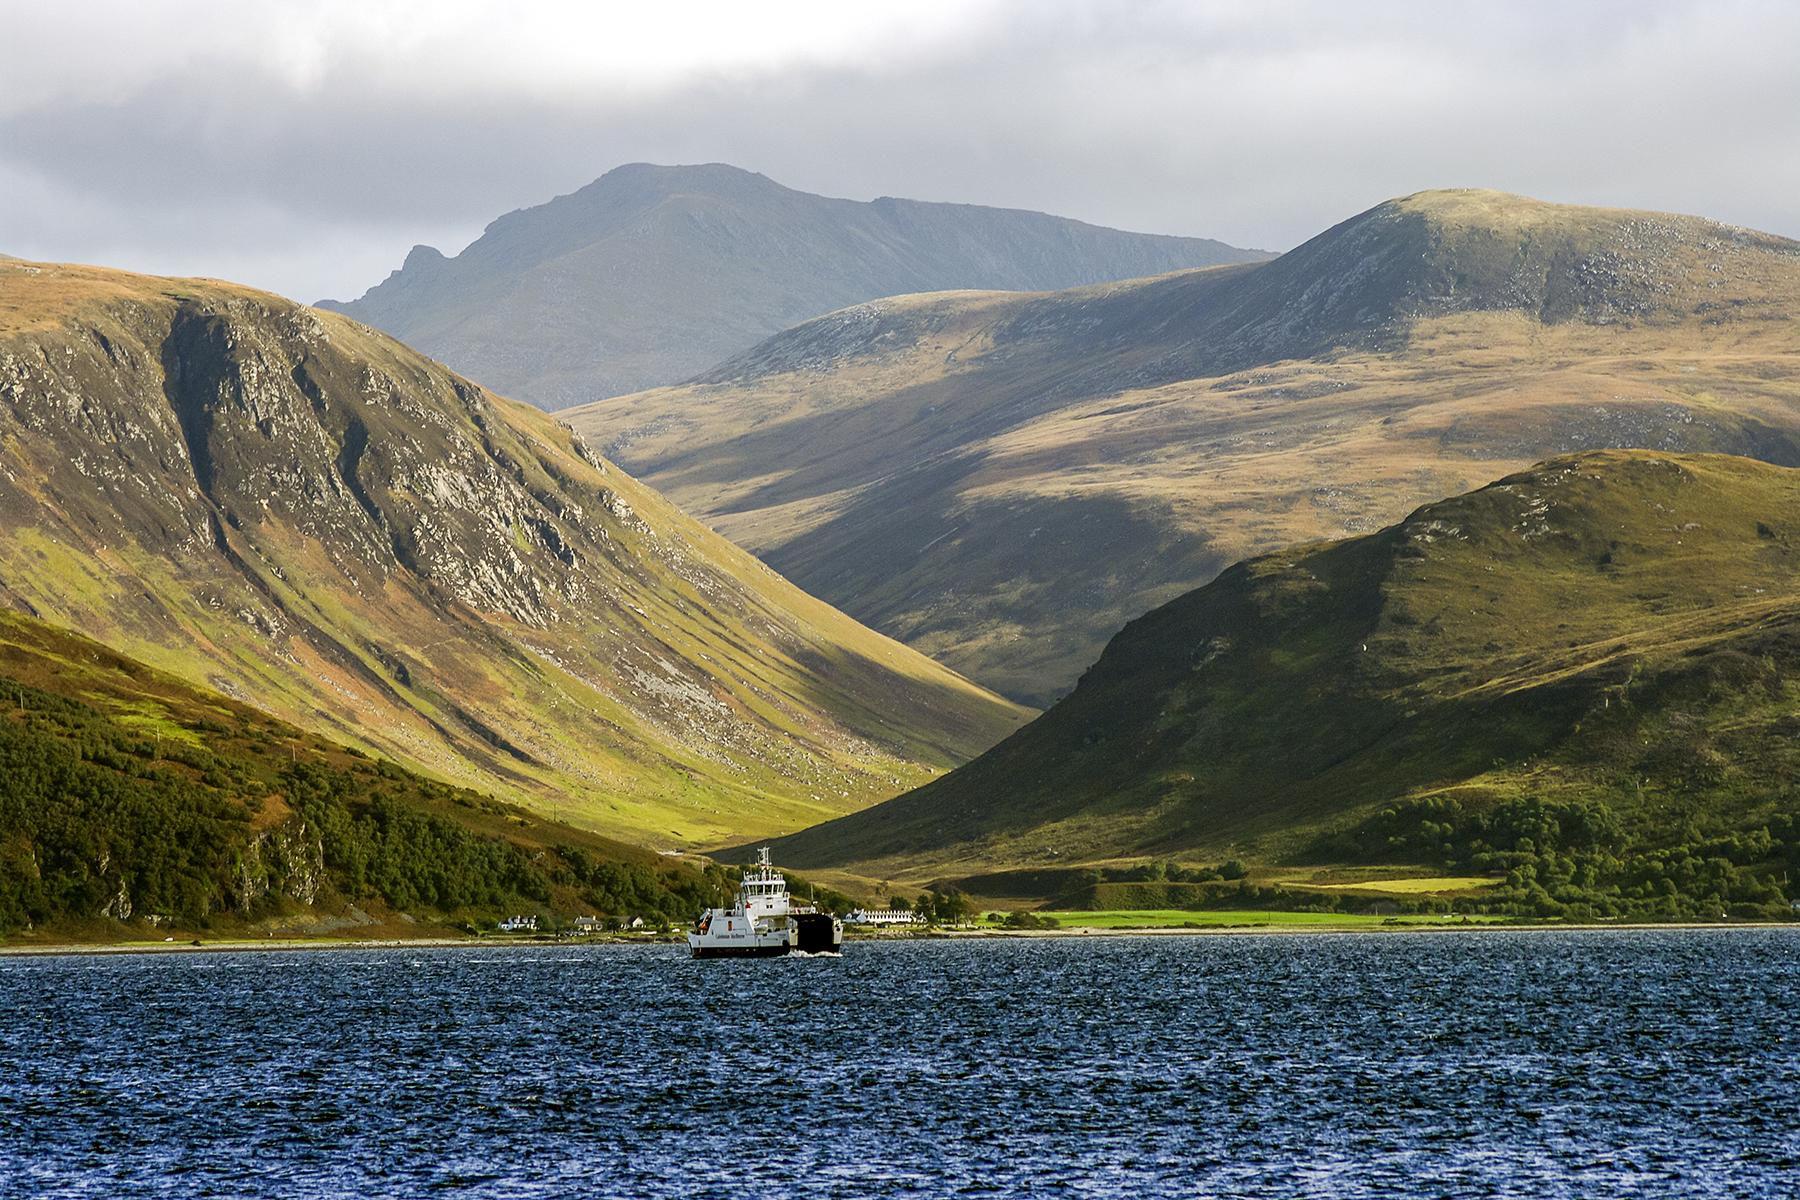 The Isle of Arran is the Best Island to Visit in Scotland